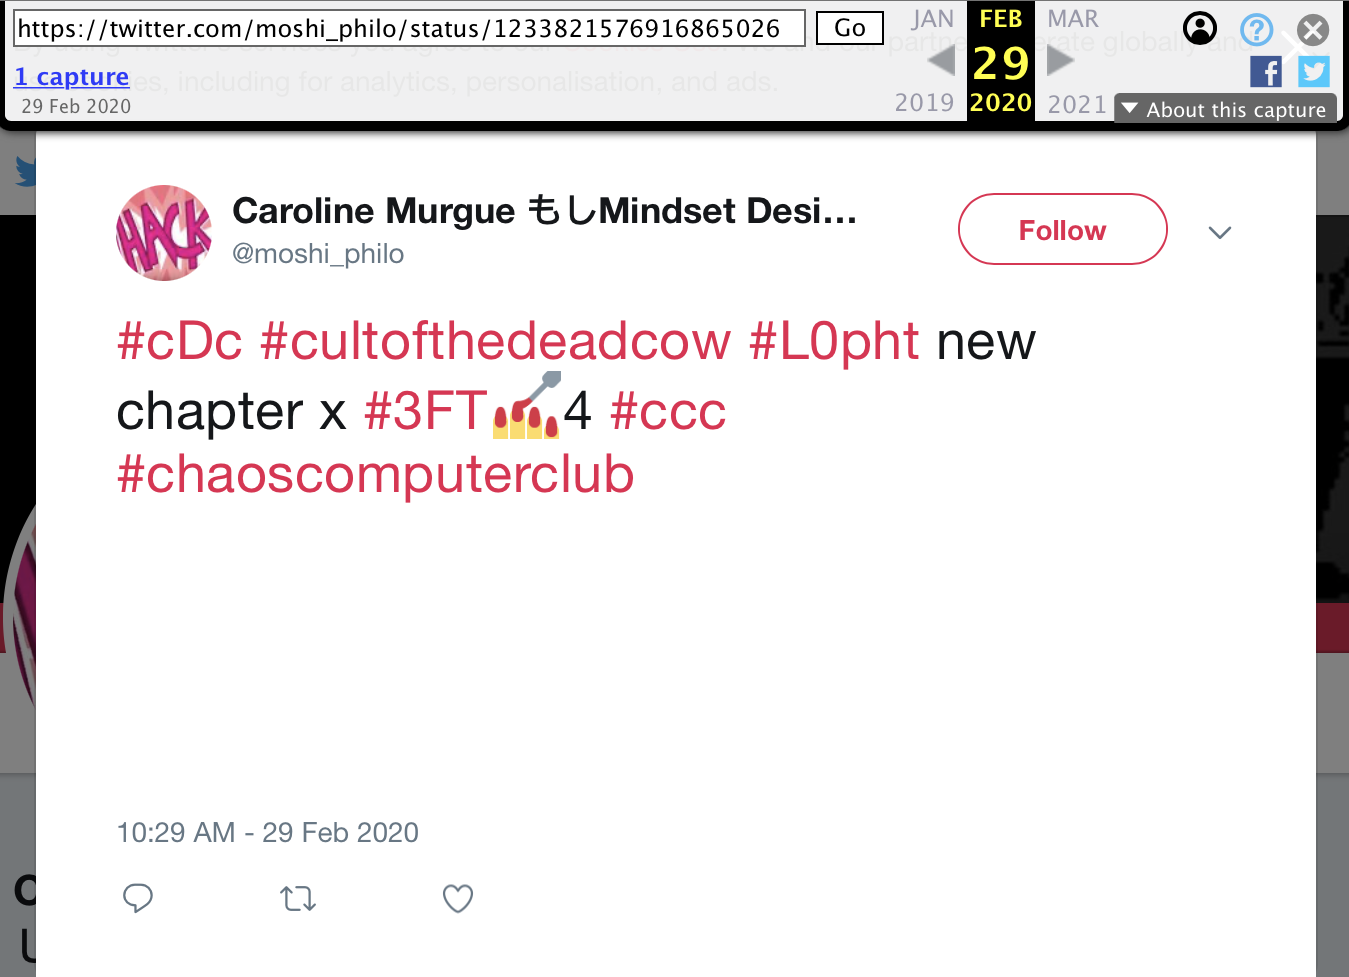 29 Feb 2020 tweet from @moshi_philo: #cDc #cultofthedeadcow #L0pht new chapter x #3FT 4 #ccc #chaoscomputerclub